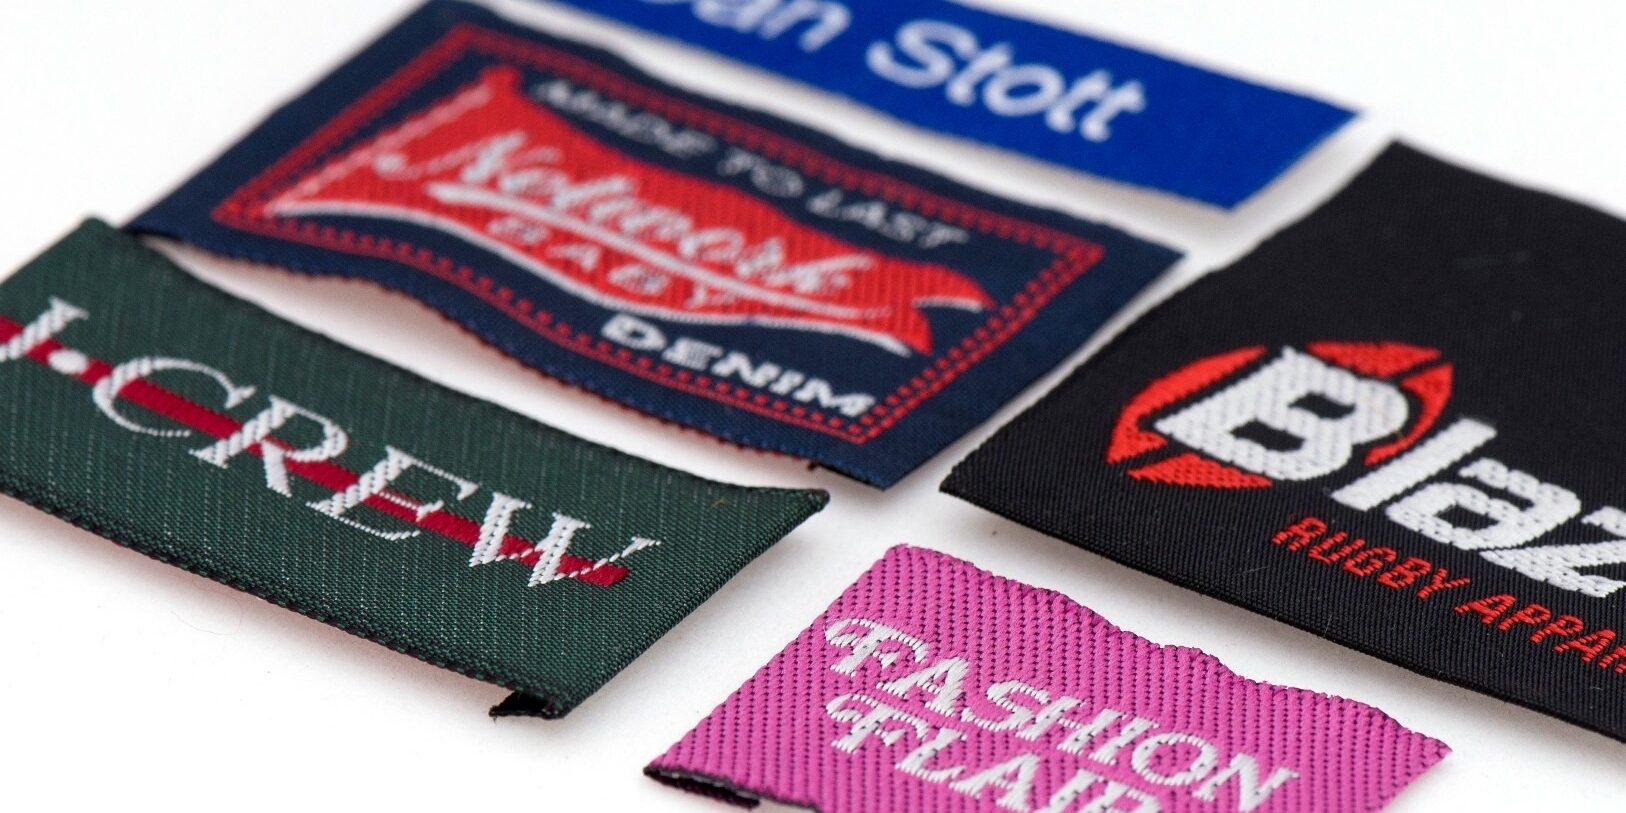 How to Choose the Right Woven Label for Your Products SunShine